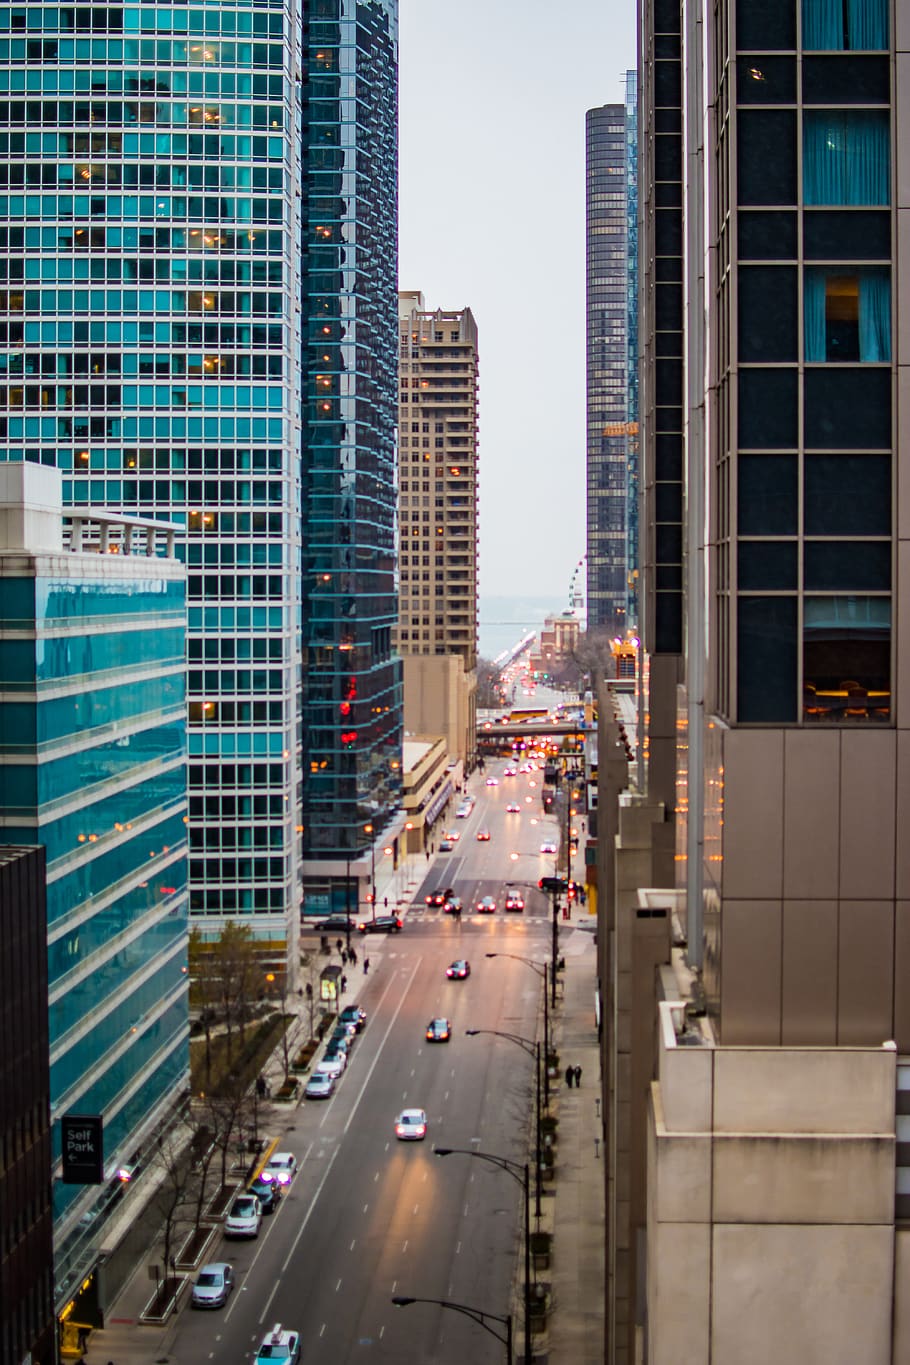 city, street, traffic, roof, rooftop, driving, cars, chicago